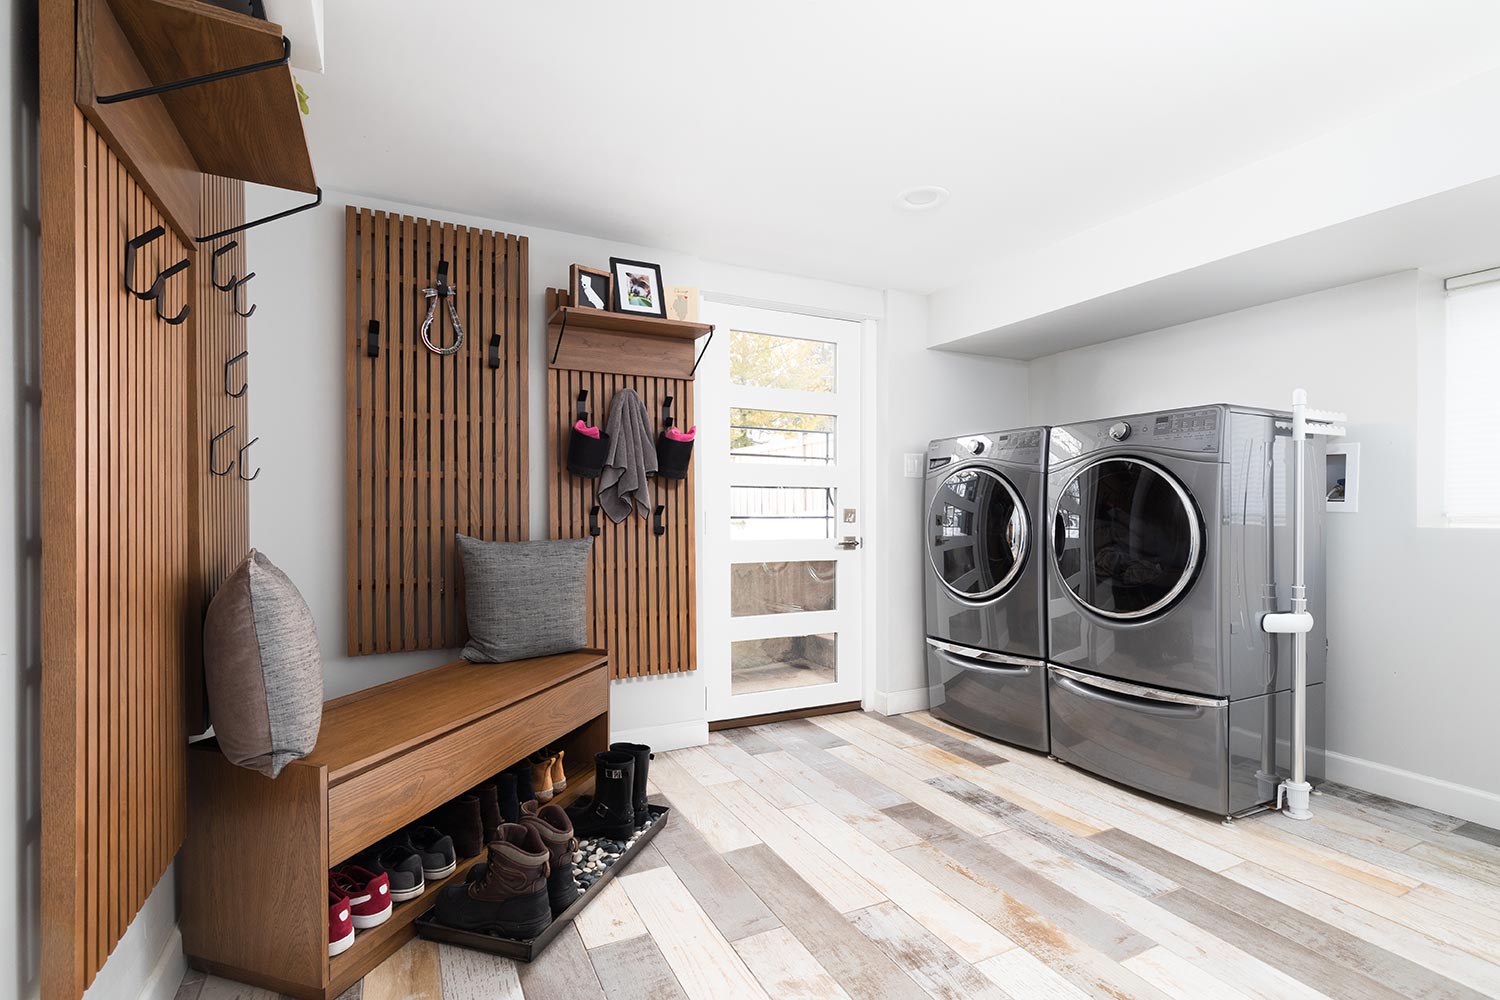 Renovated laundry room with hooks mounted on the wall